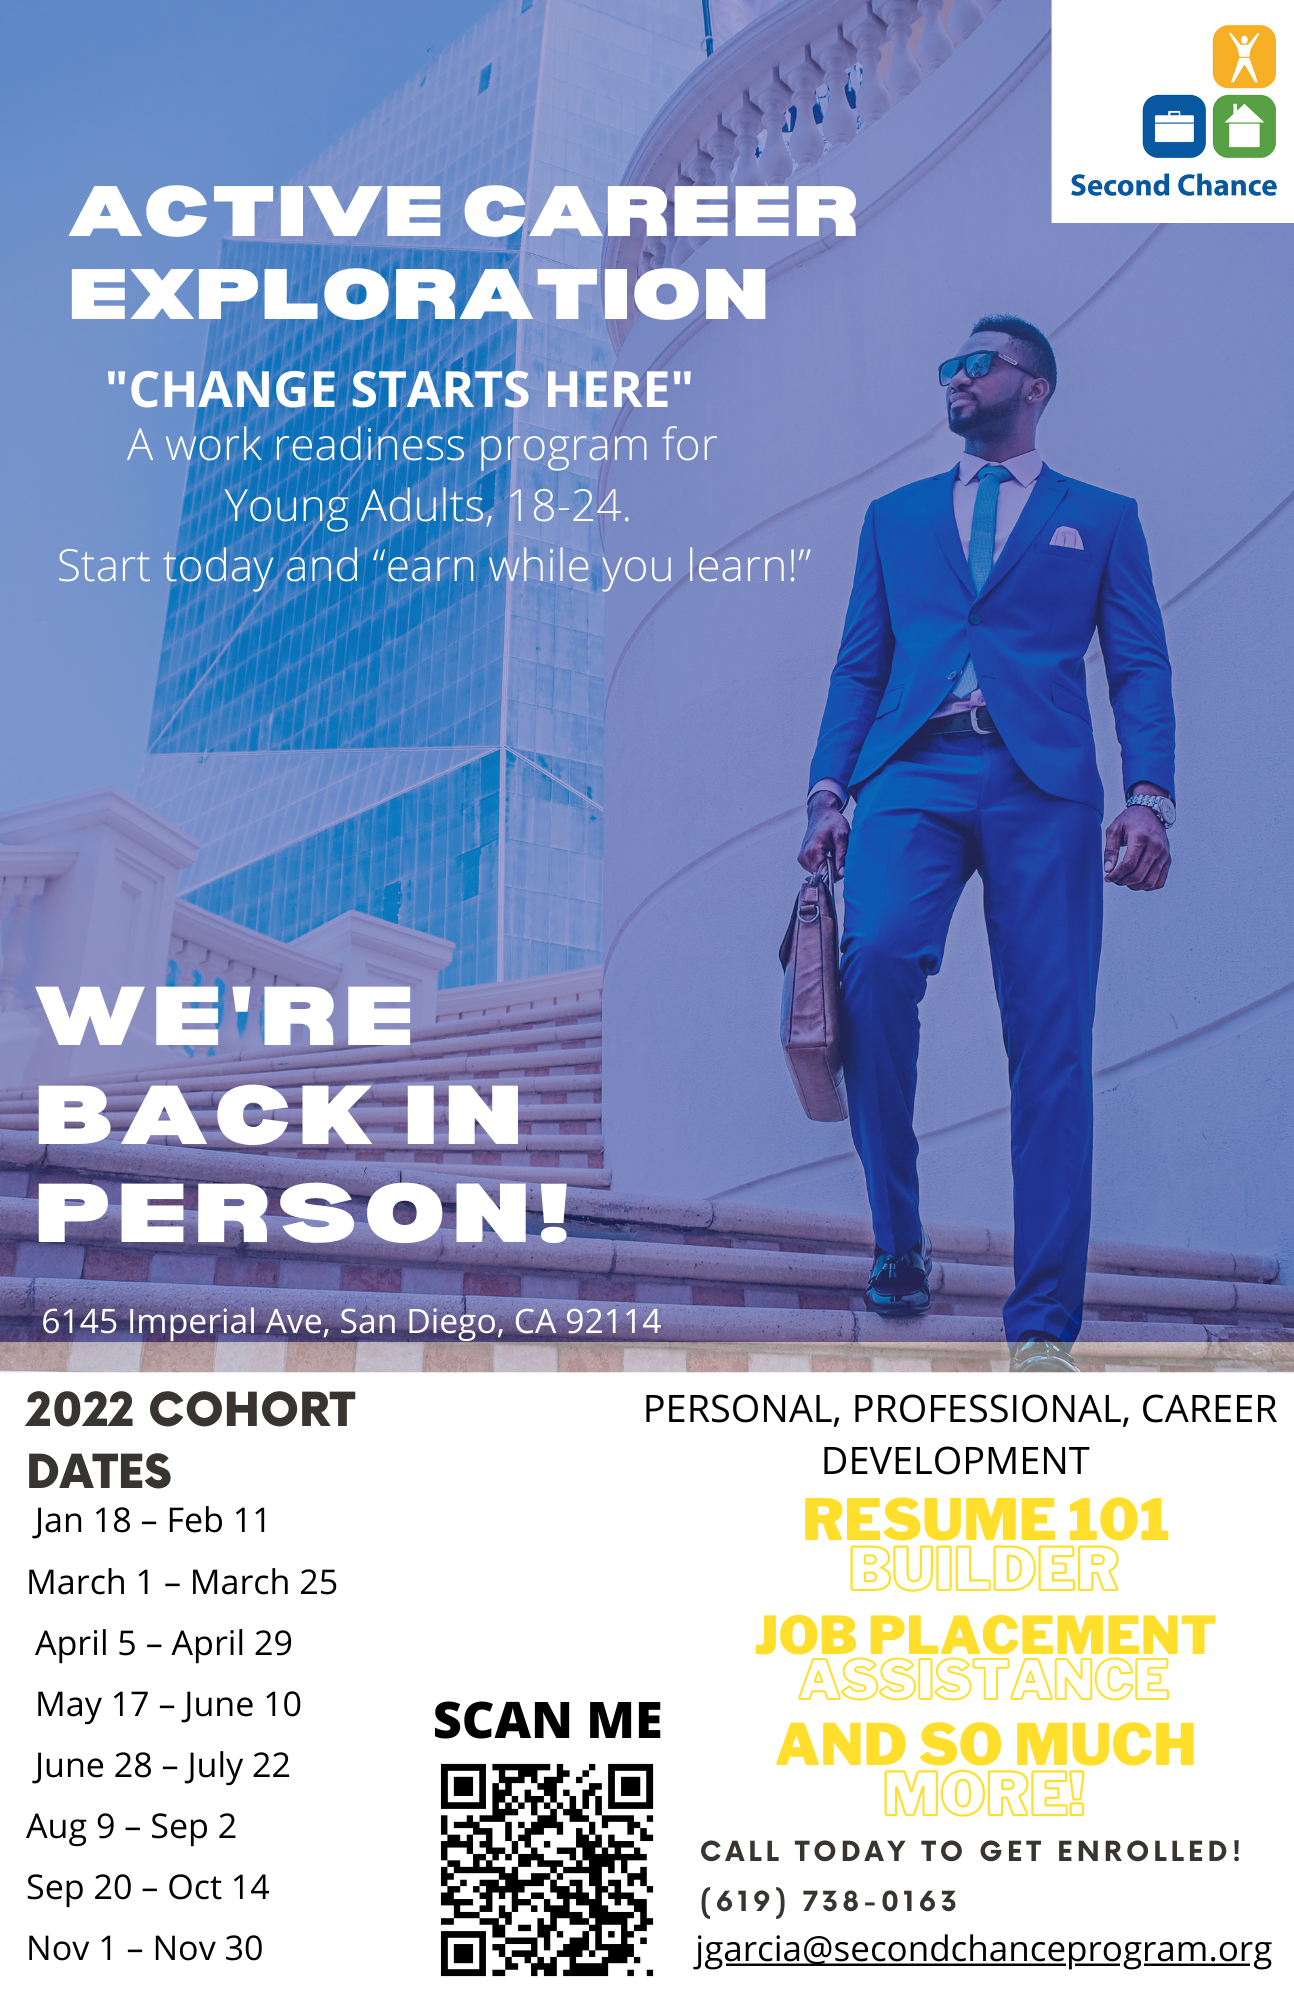 Active Career Exploration flyer features a young man in stylish business attire.